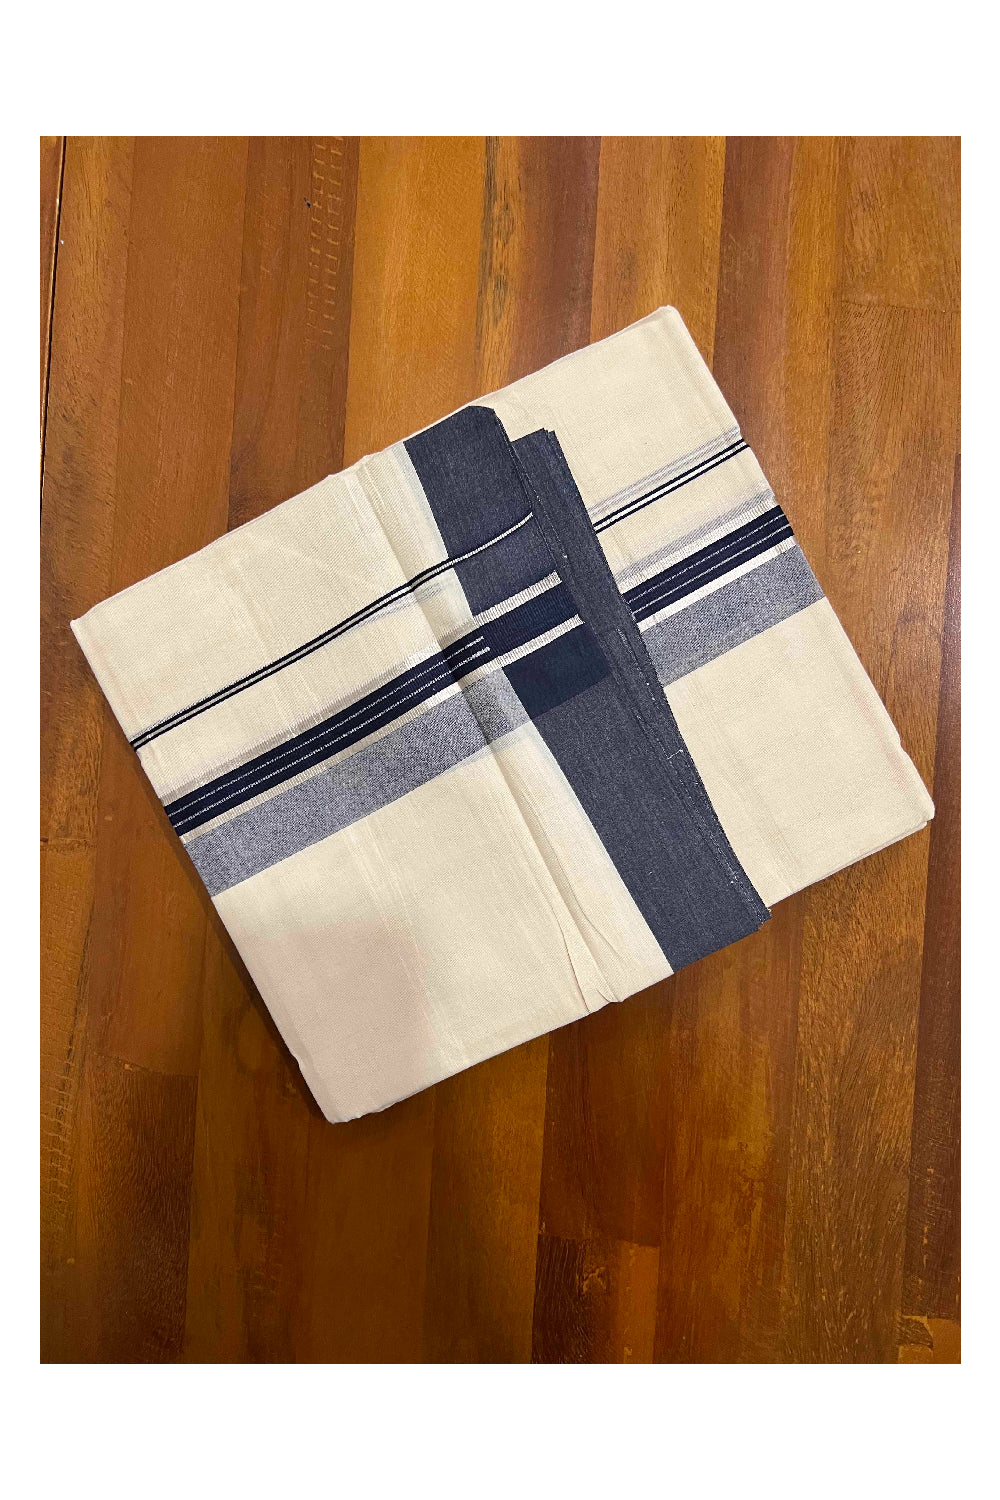 Off White Kerala Double Mundu with Silver Kasavu and Navy Blue Border (South Indian Dhoti)